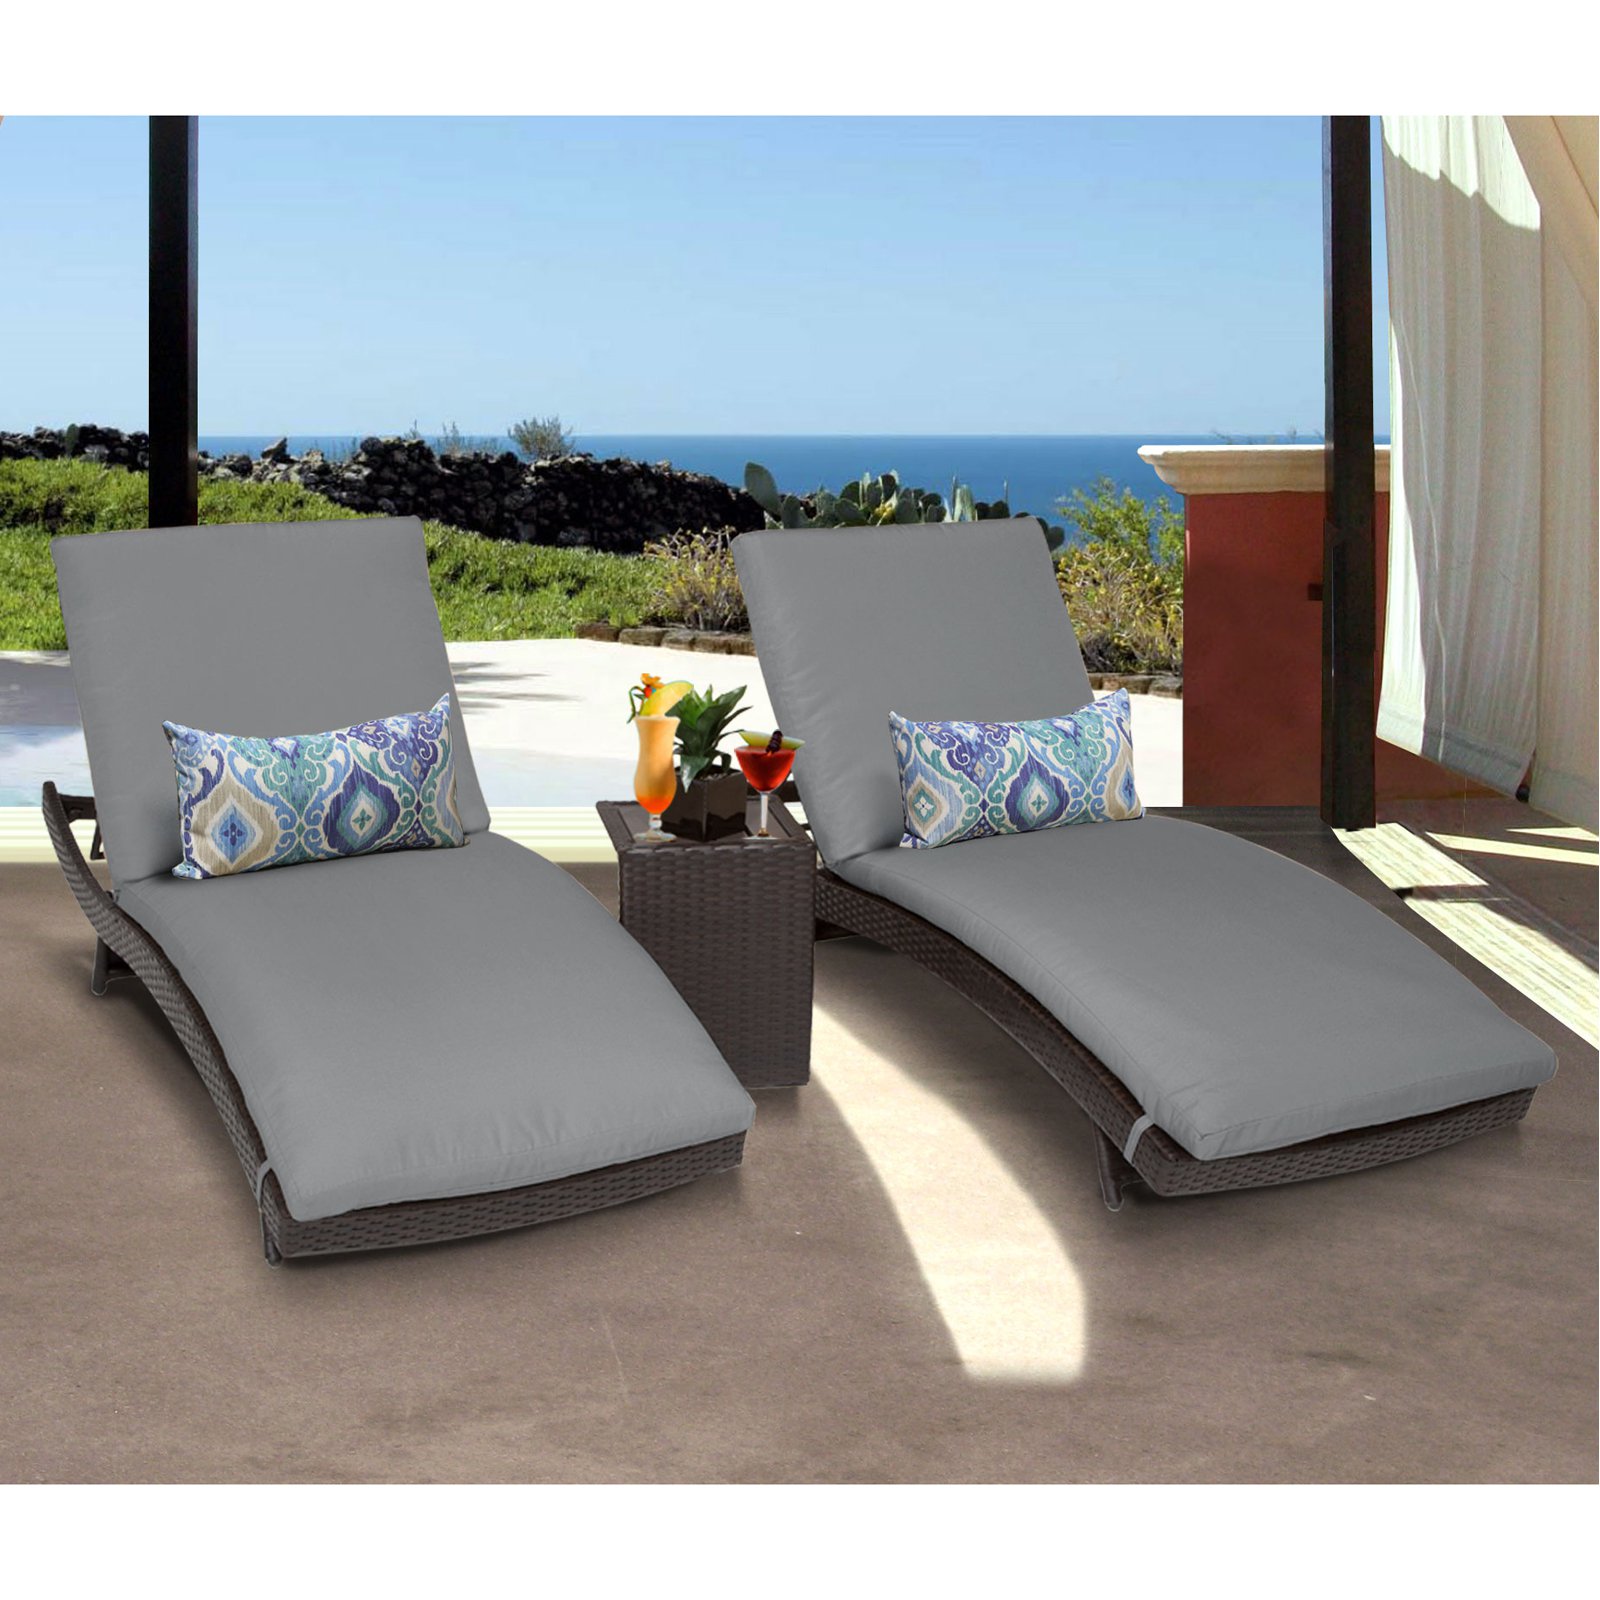 Barbados Curved Chaise Outdoor Wicker Patio Furniture in White (Set of 2) - image 4 of 4